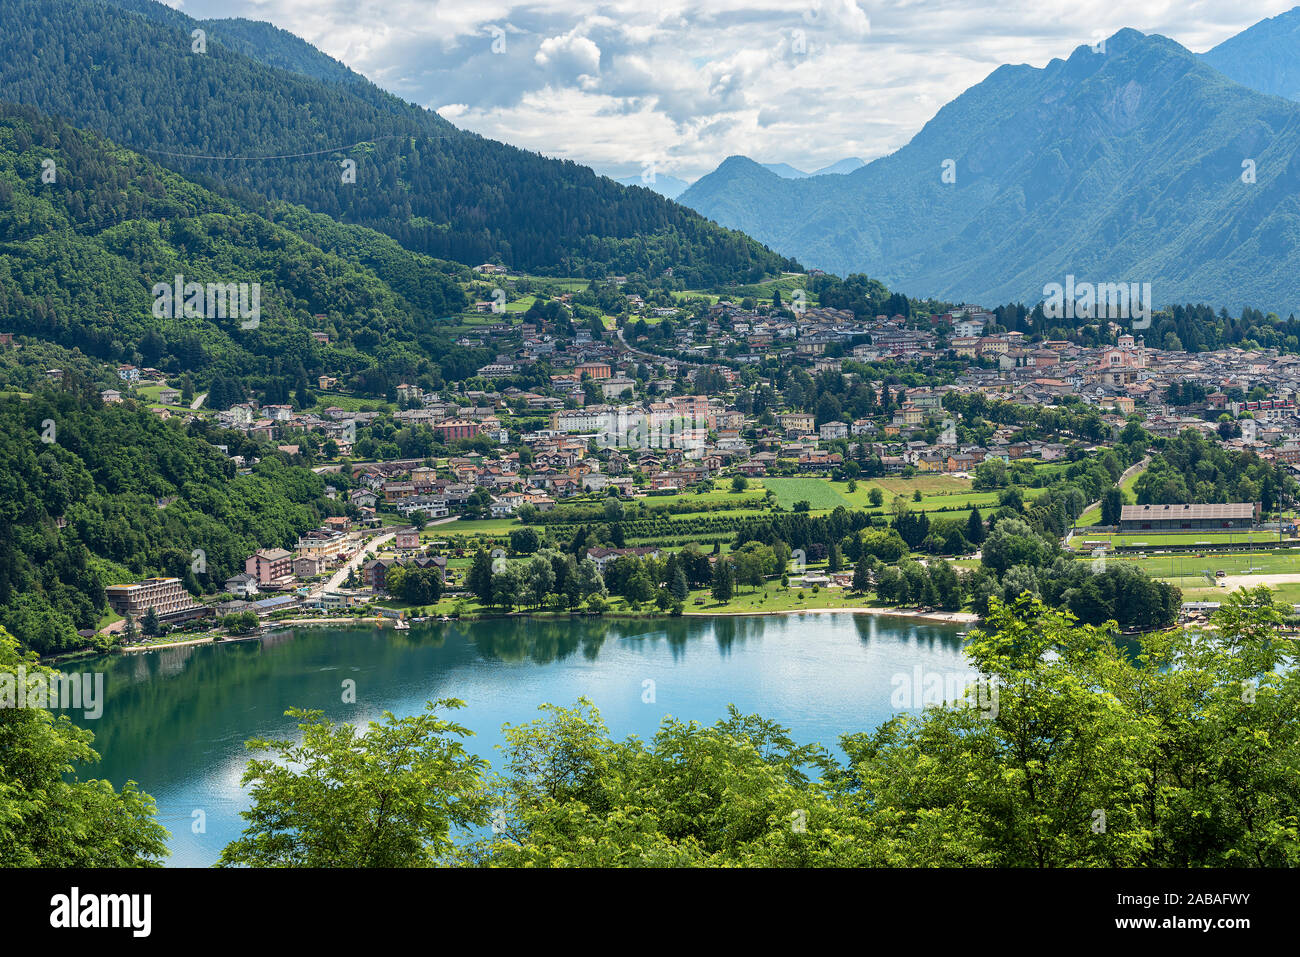 Aerial view of the small town of Levico Terme with the lake (Lago di Levico) and the mountains, Alps. Trentino Alto Adige, Italy, Europe Stock Photo